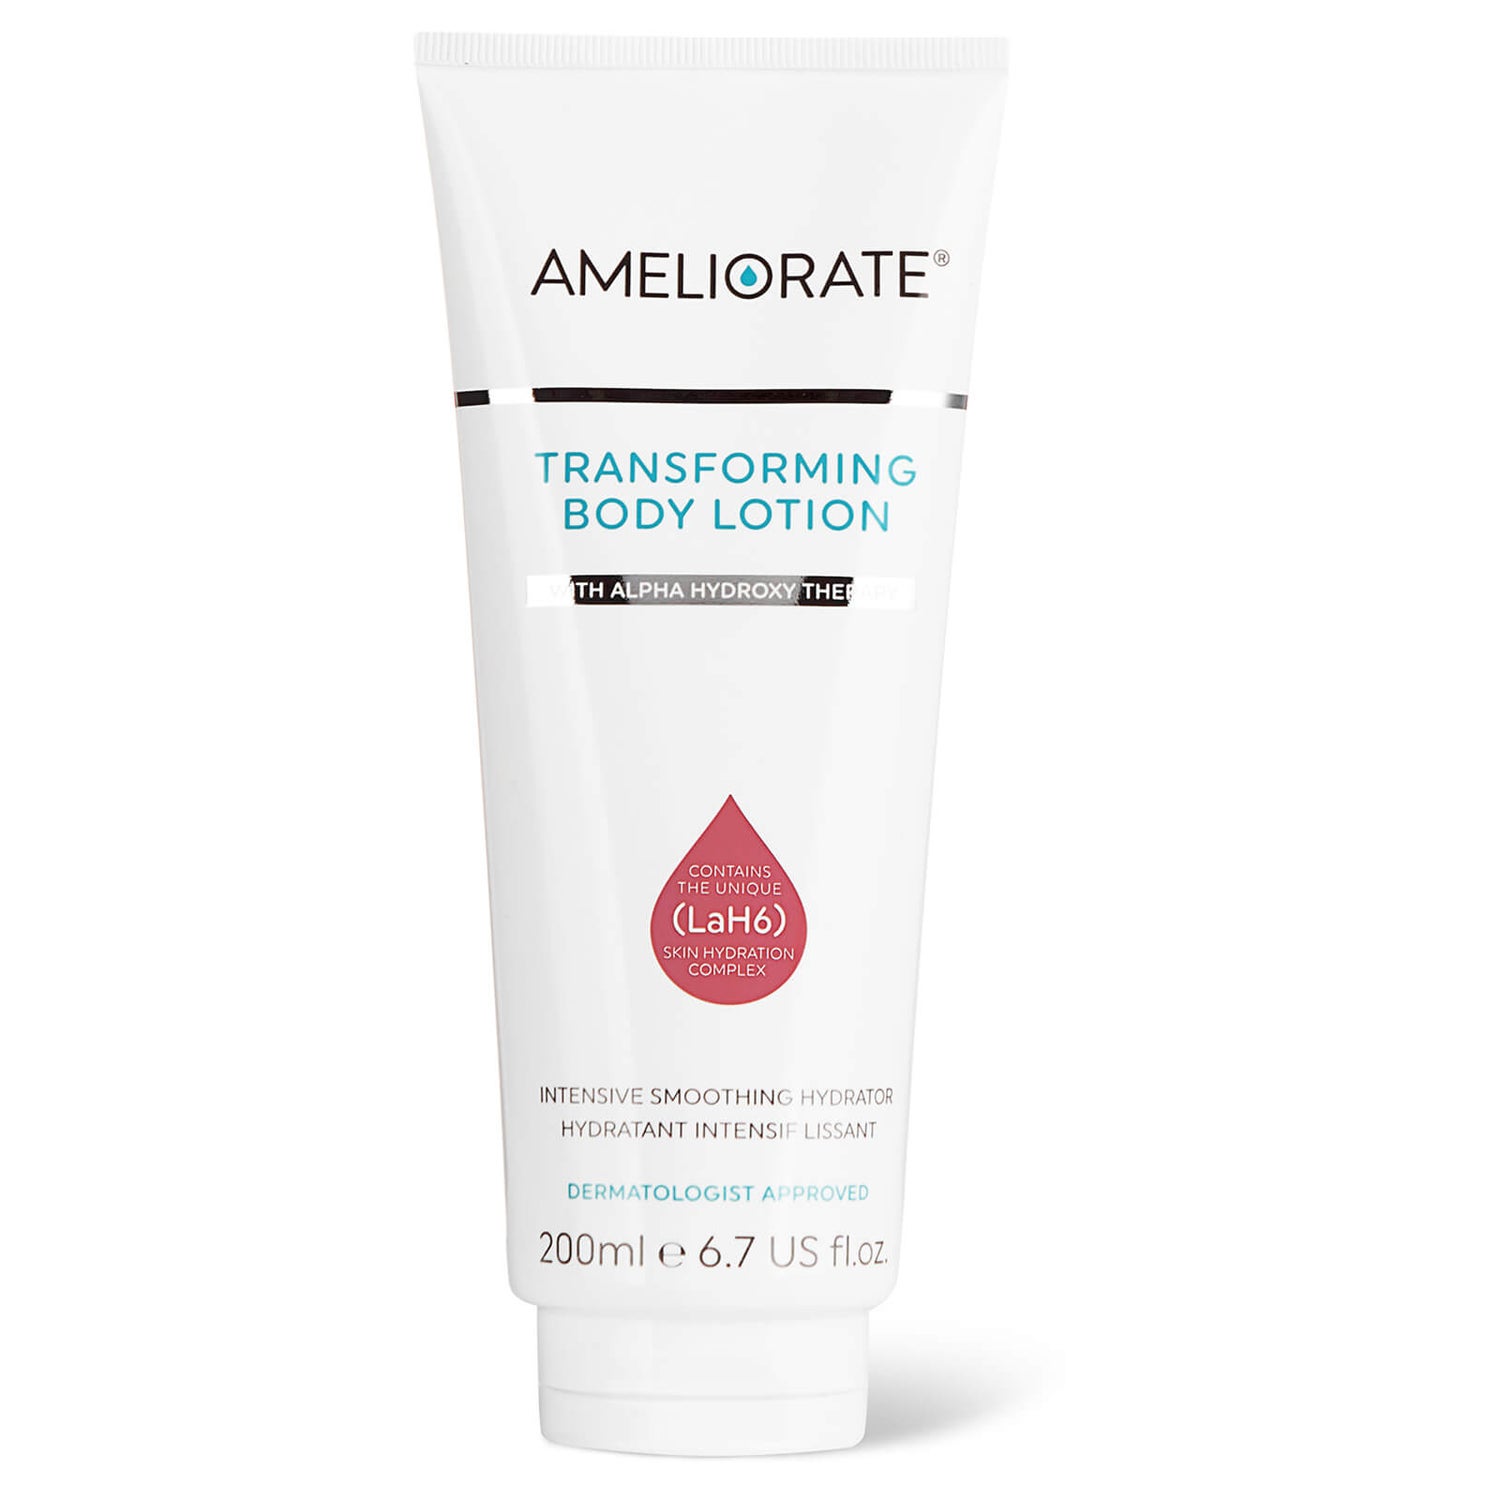 bud Snuble mild AMELIORATE Transforming Body Lotion - Winter Limited Edition 200ml -  Dermstore